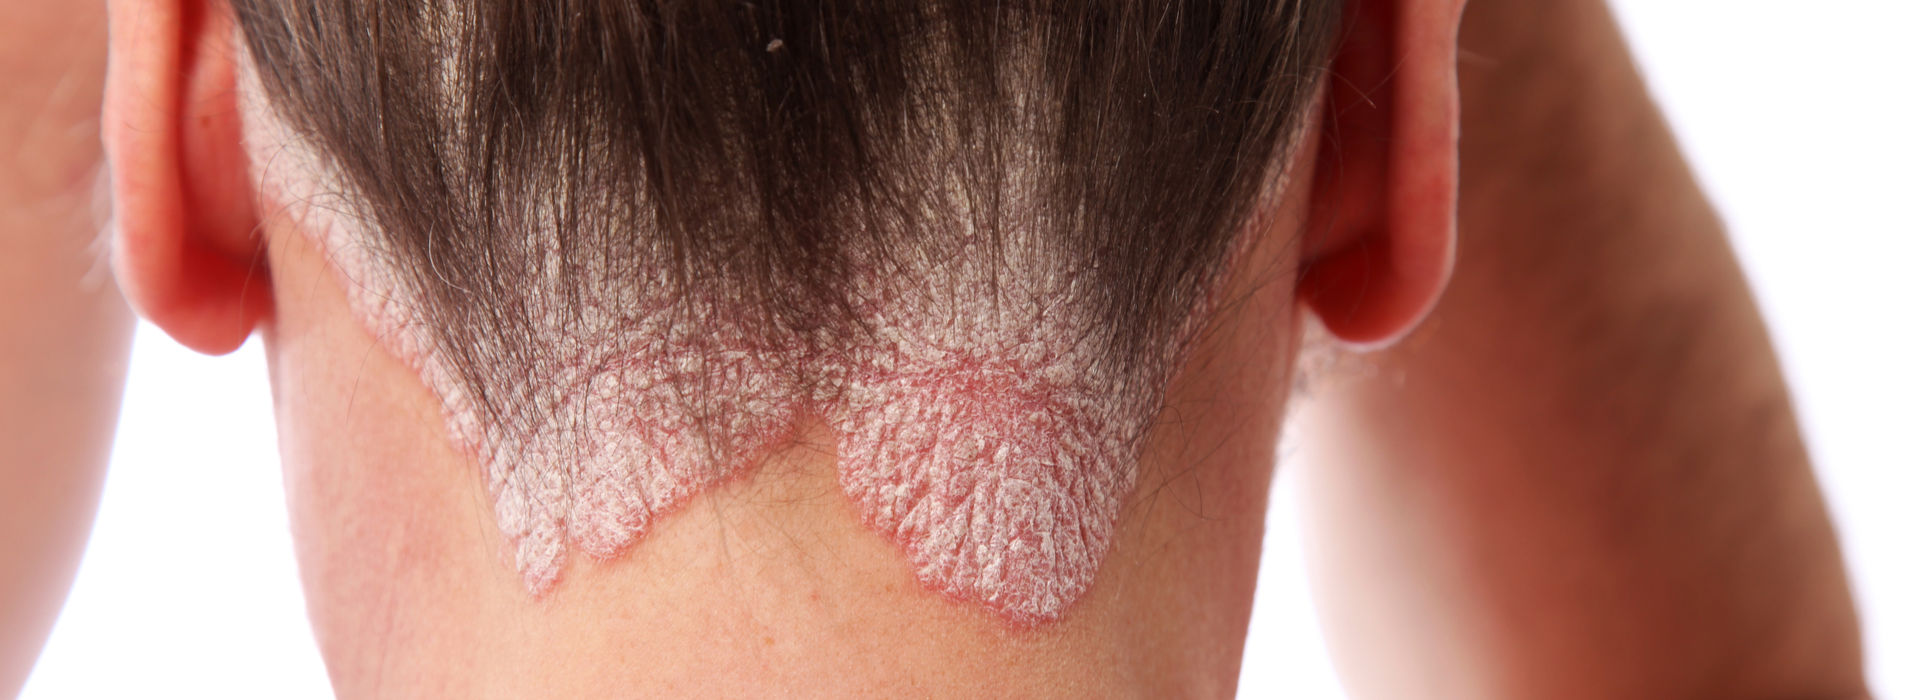 Woman with psoriasis.